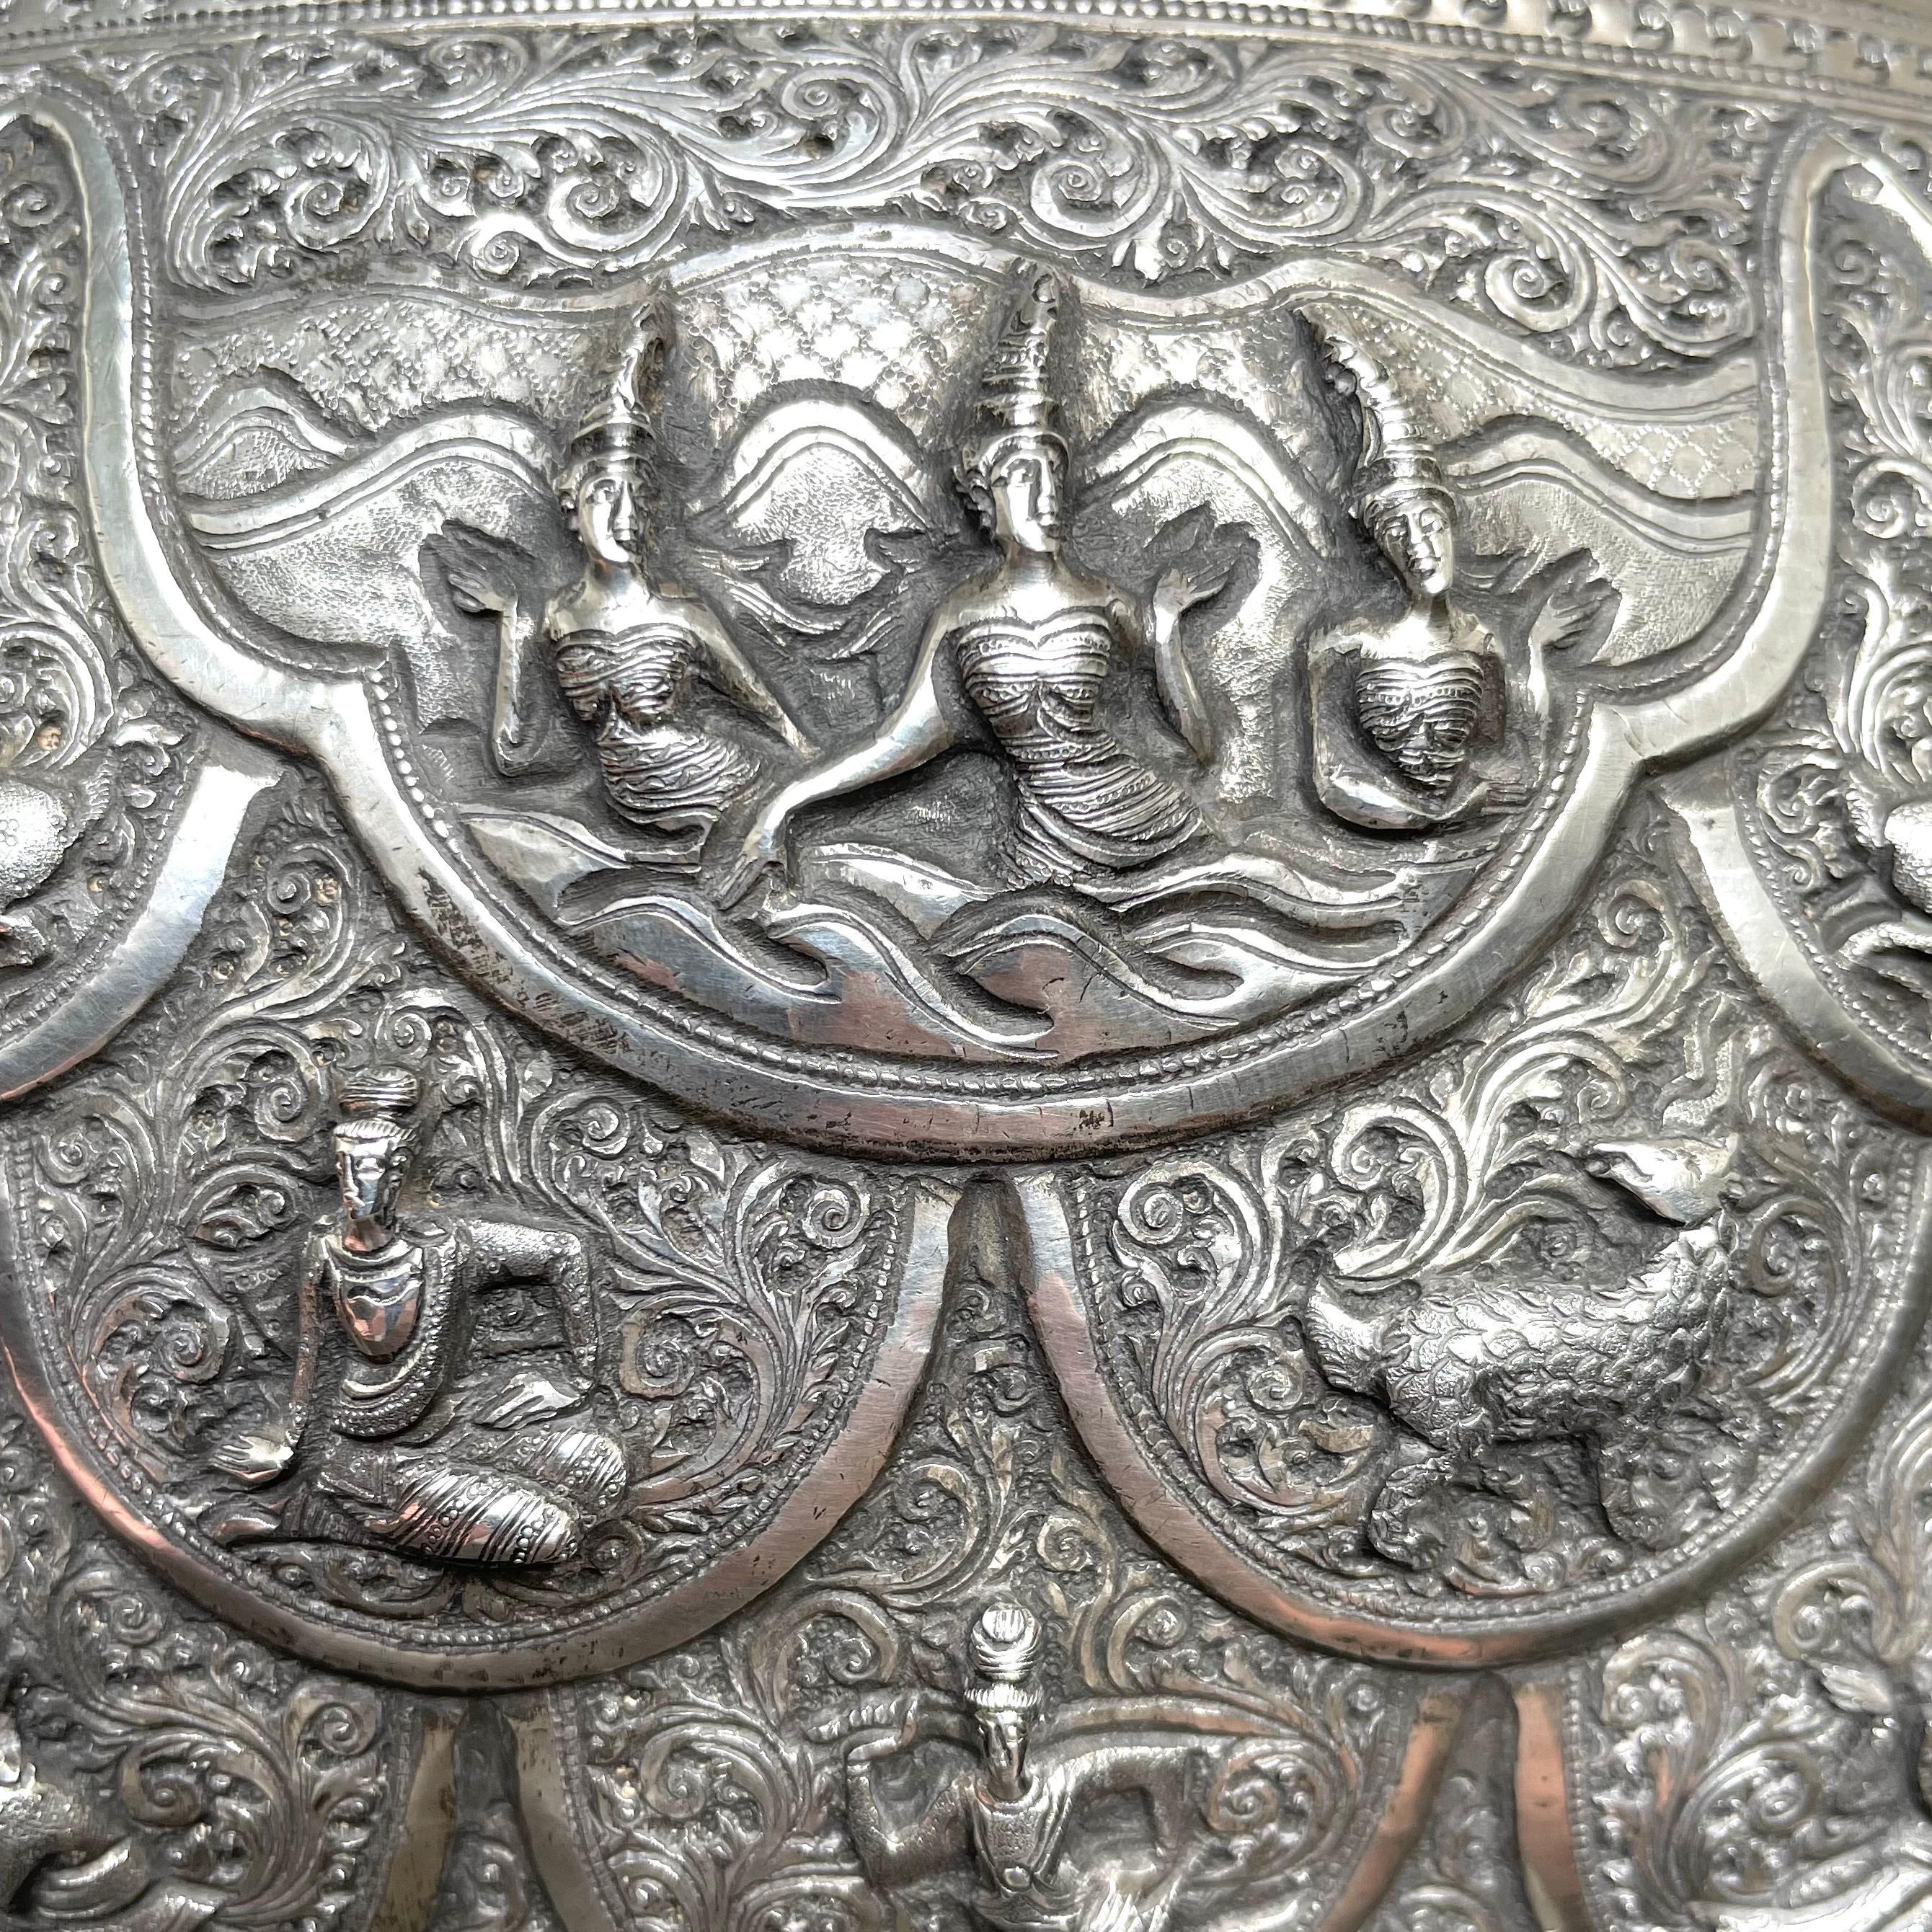 Other Antique Burmese Silver Offering Bowl For Sale